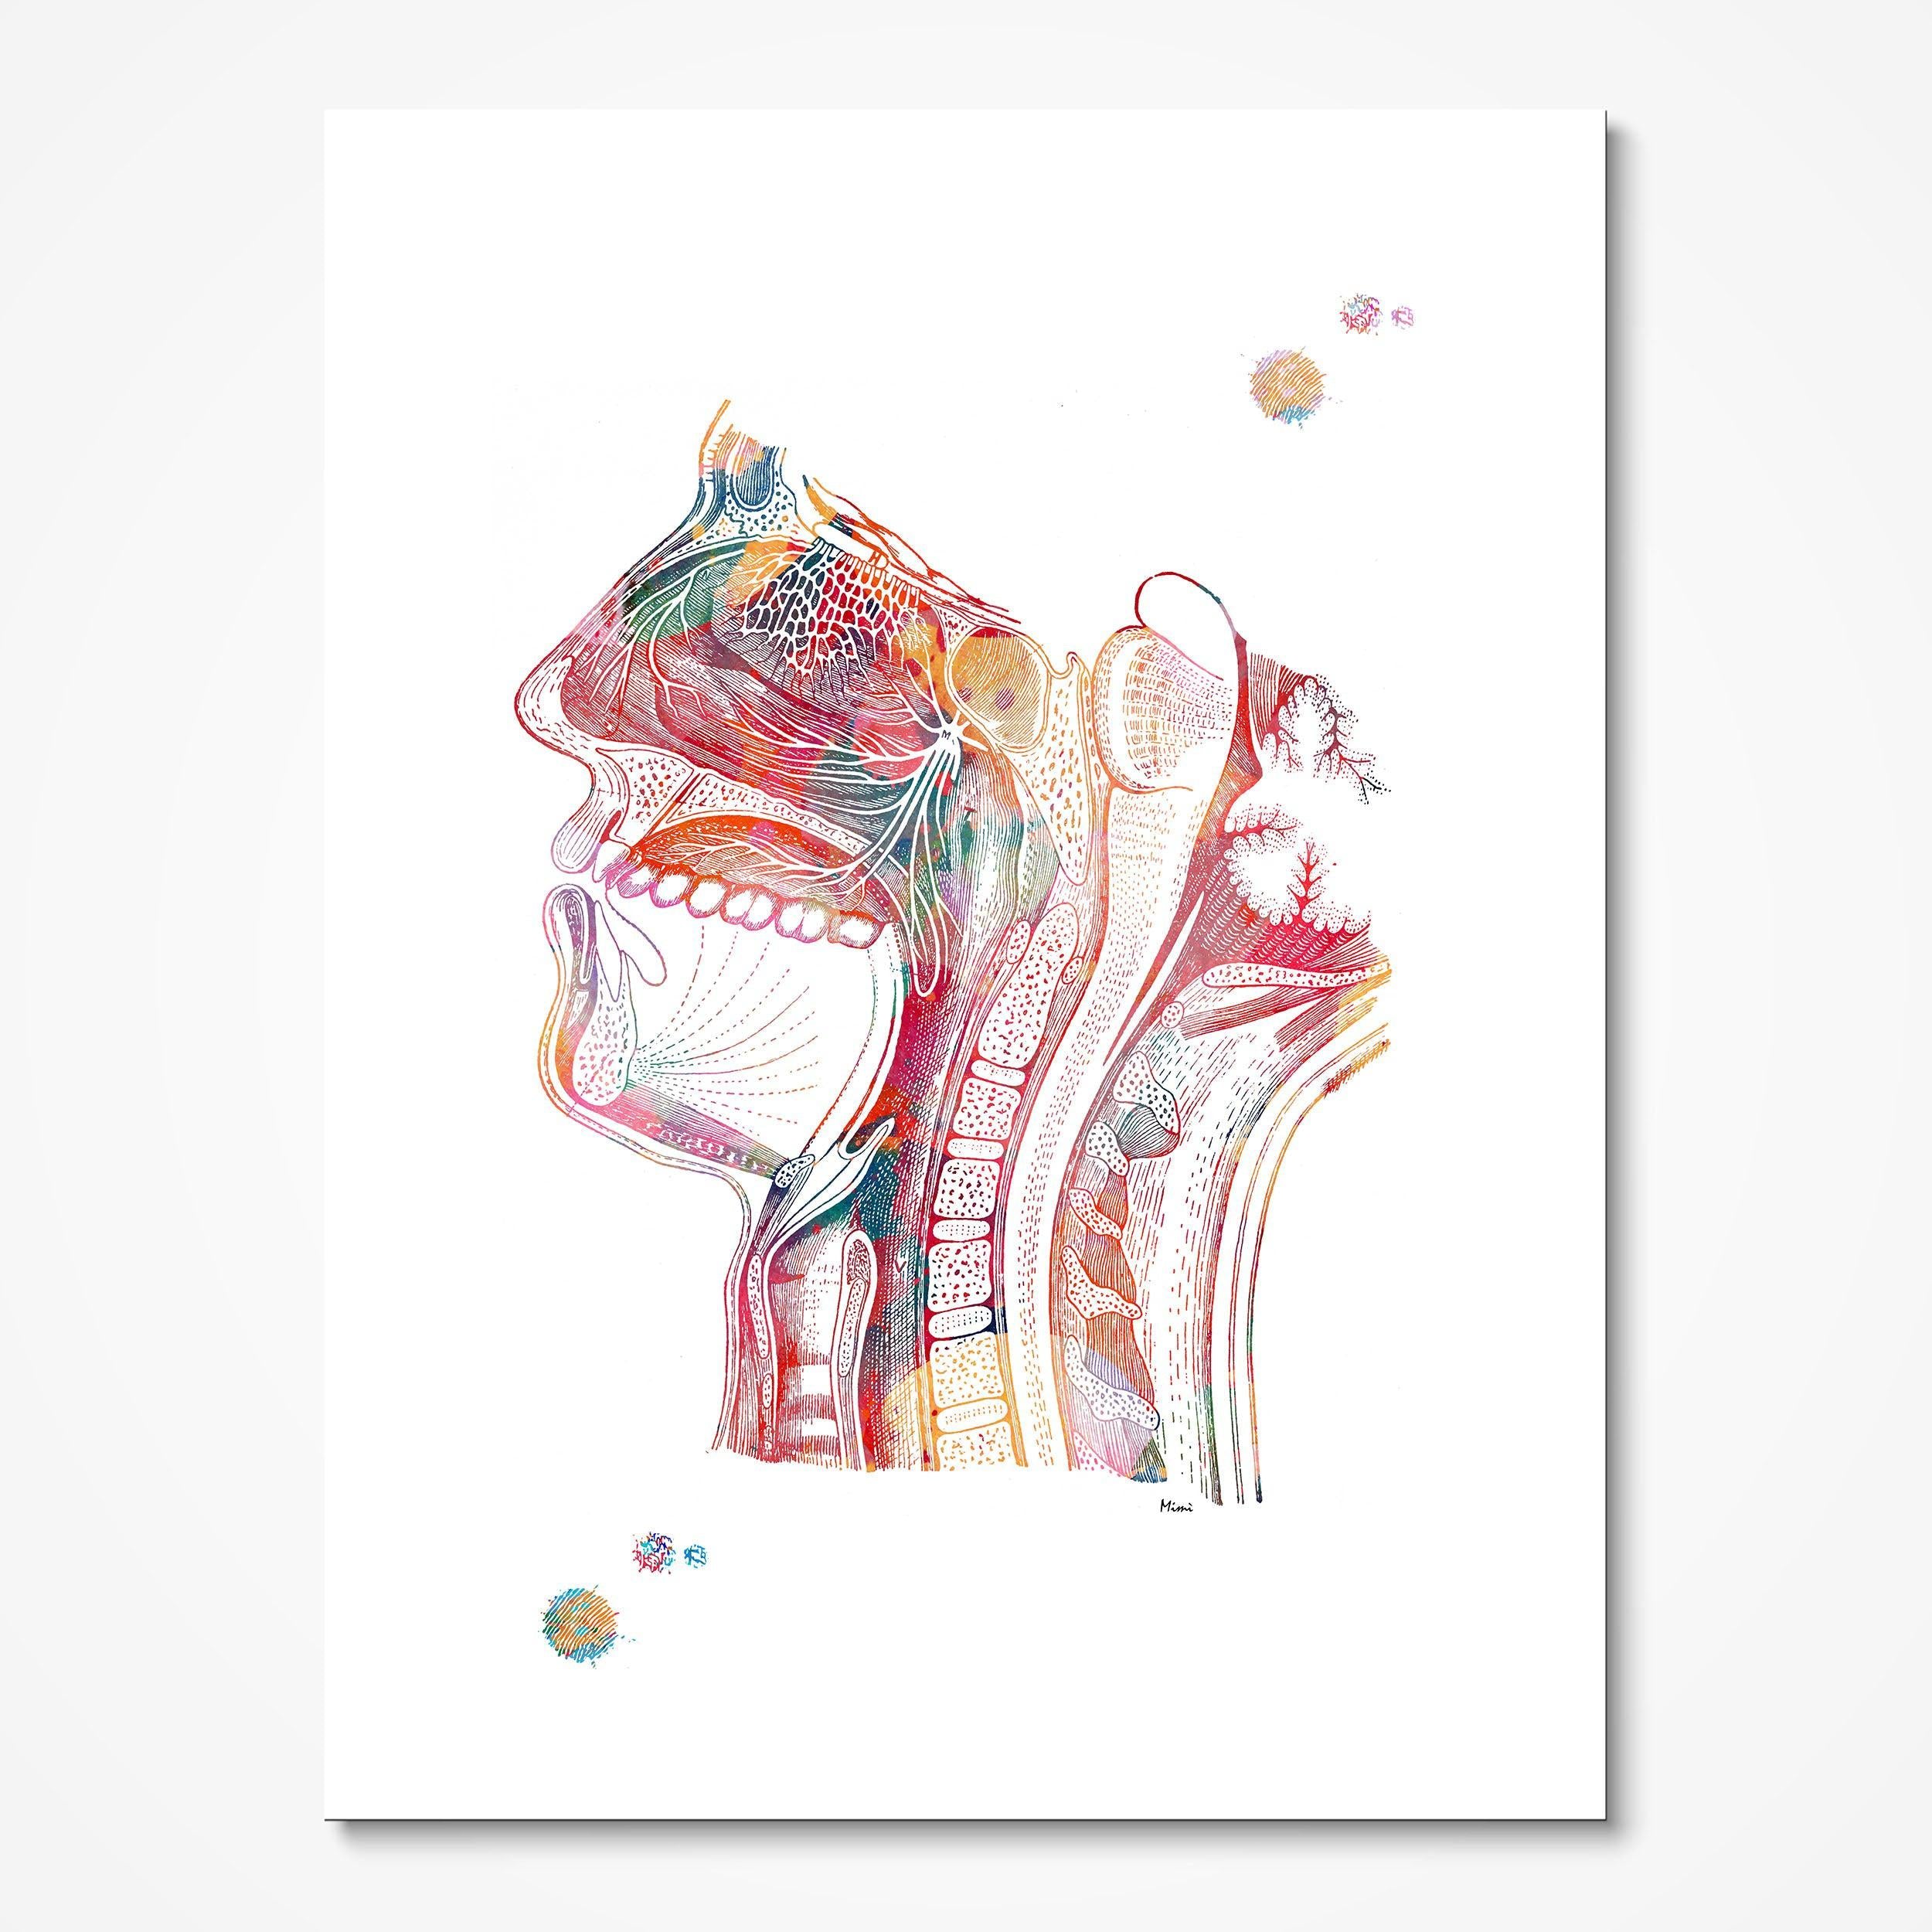 Nose Mouth Throat Anatomy Print Respiratory System Medical Illustration Medicine Clinic Wall Decor